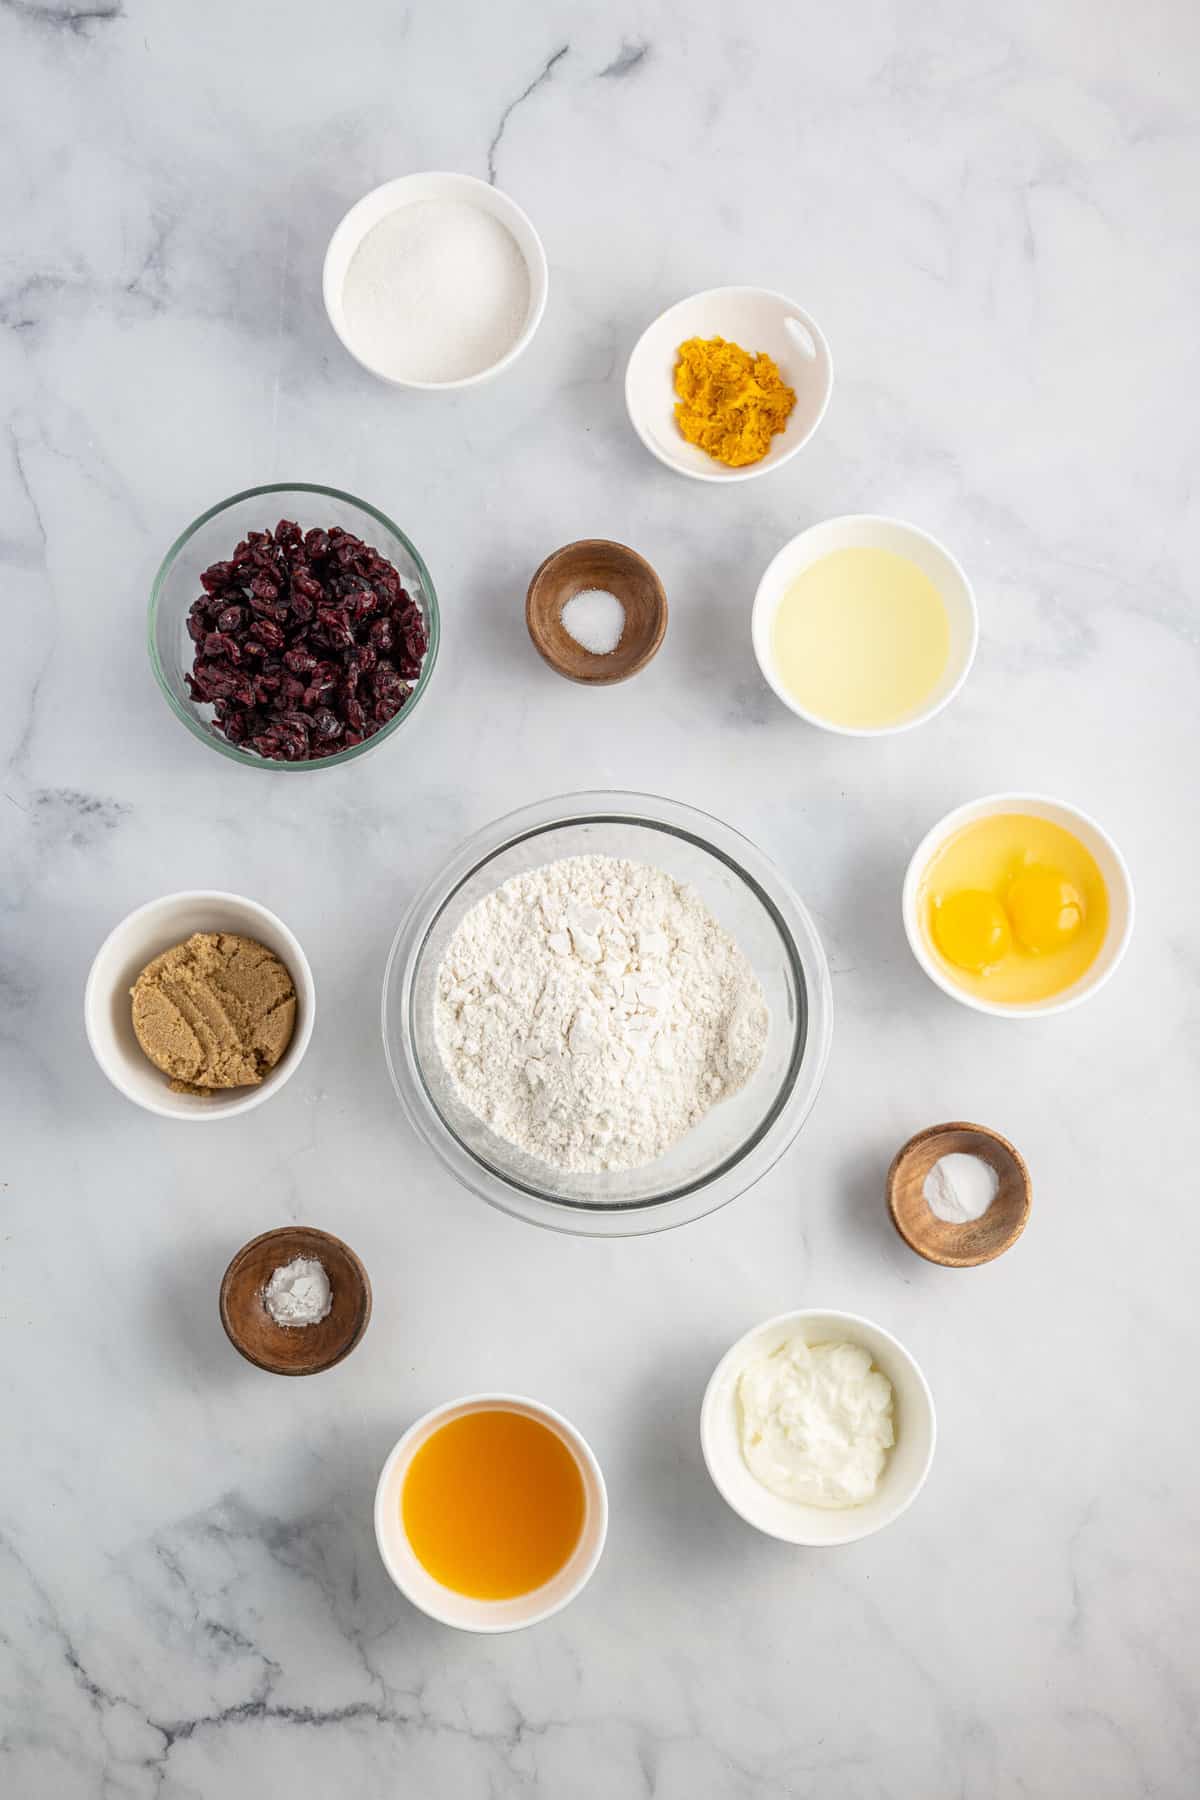 The ingredients for cranberry orange muffins are presented on a white surface.